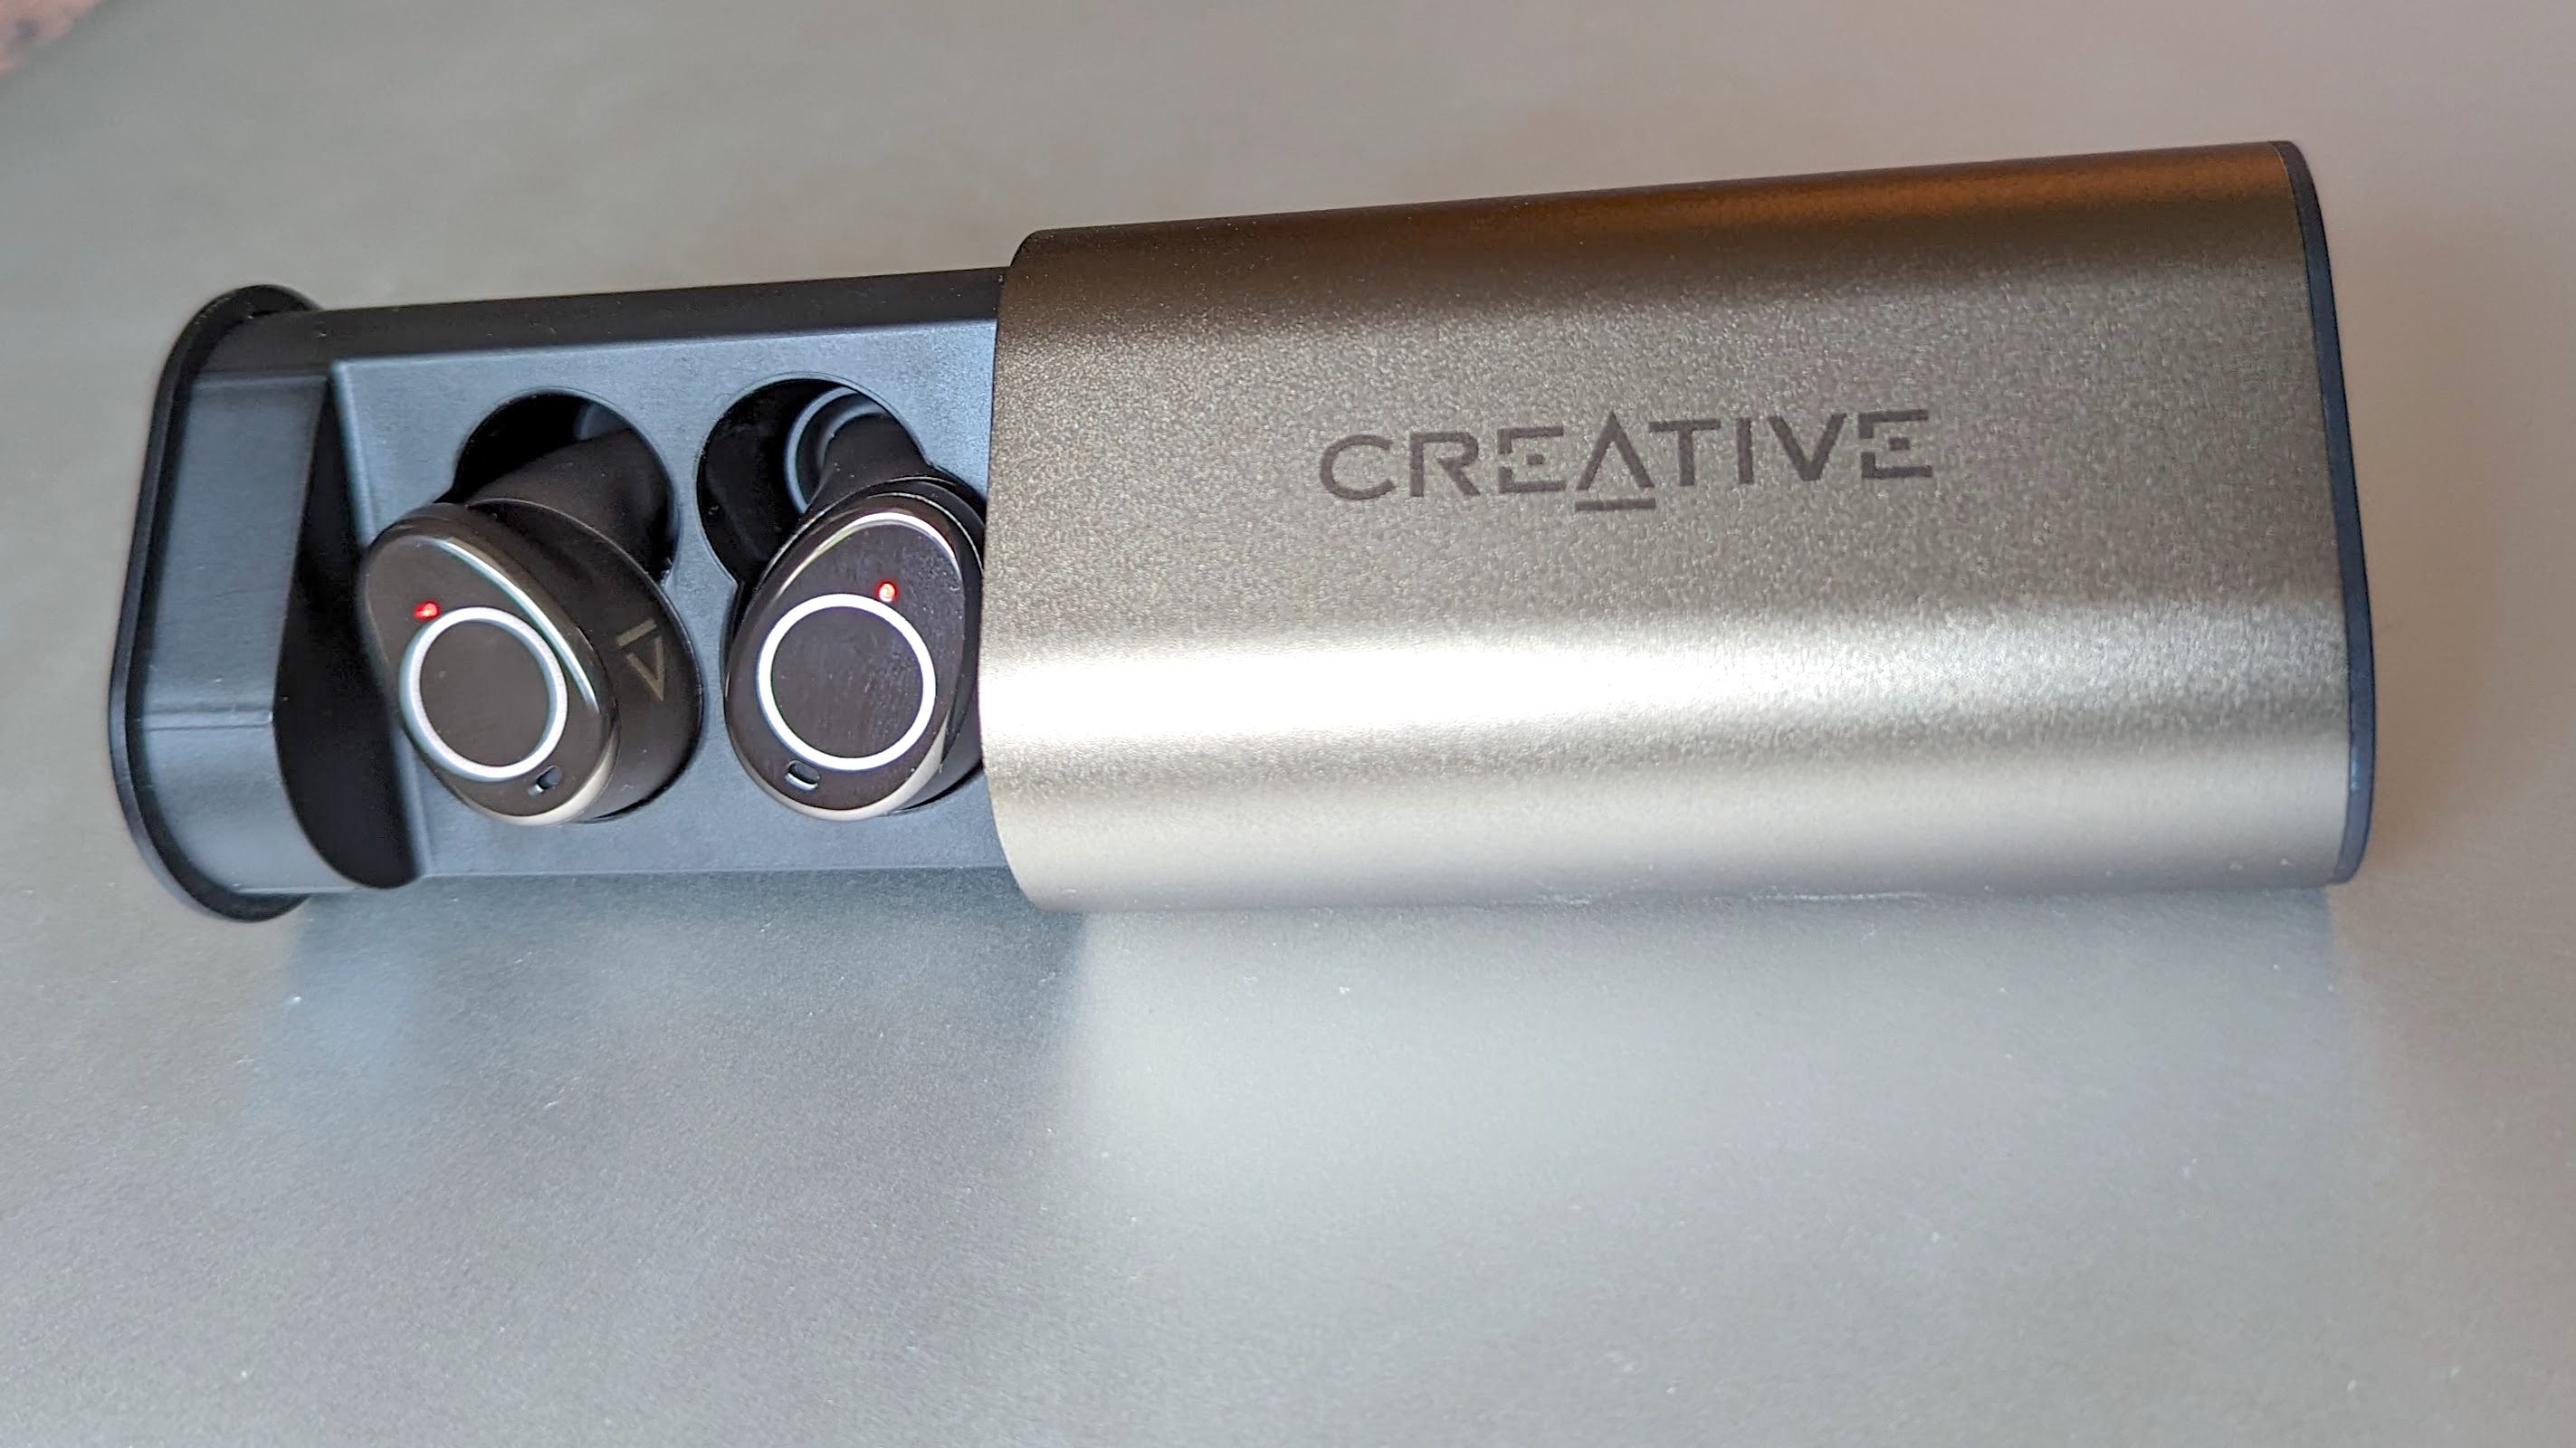 The Creative Outlier Pro ANC wireless earbuds in their charging case